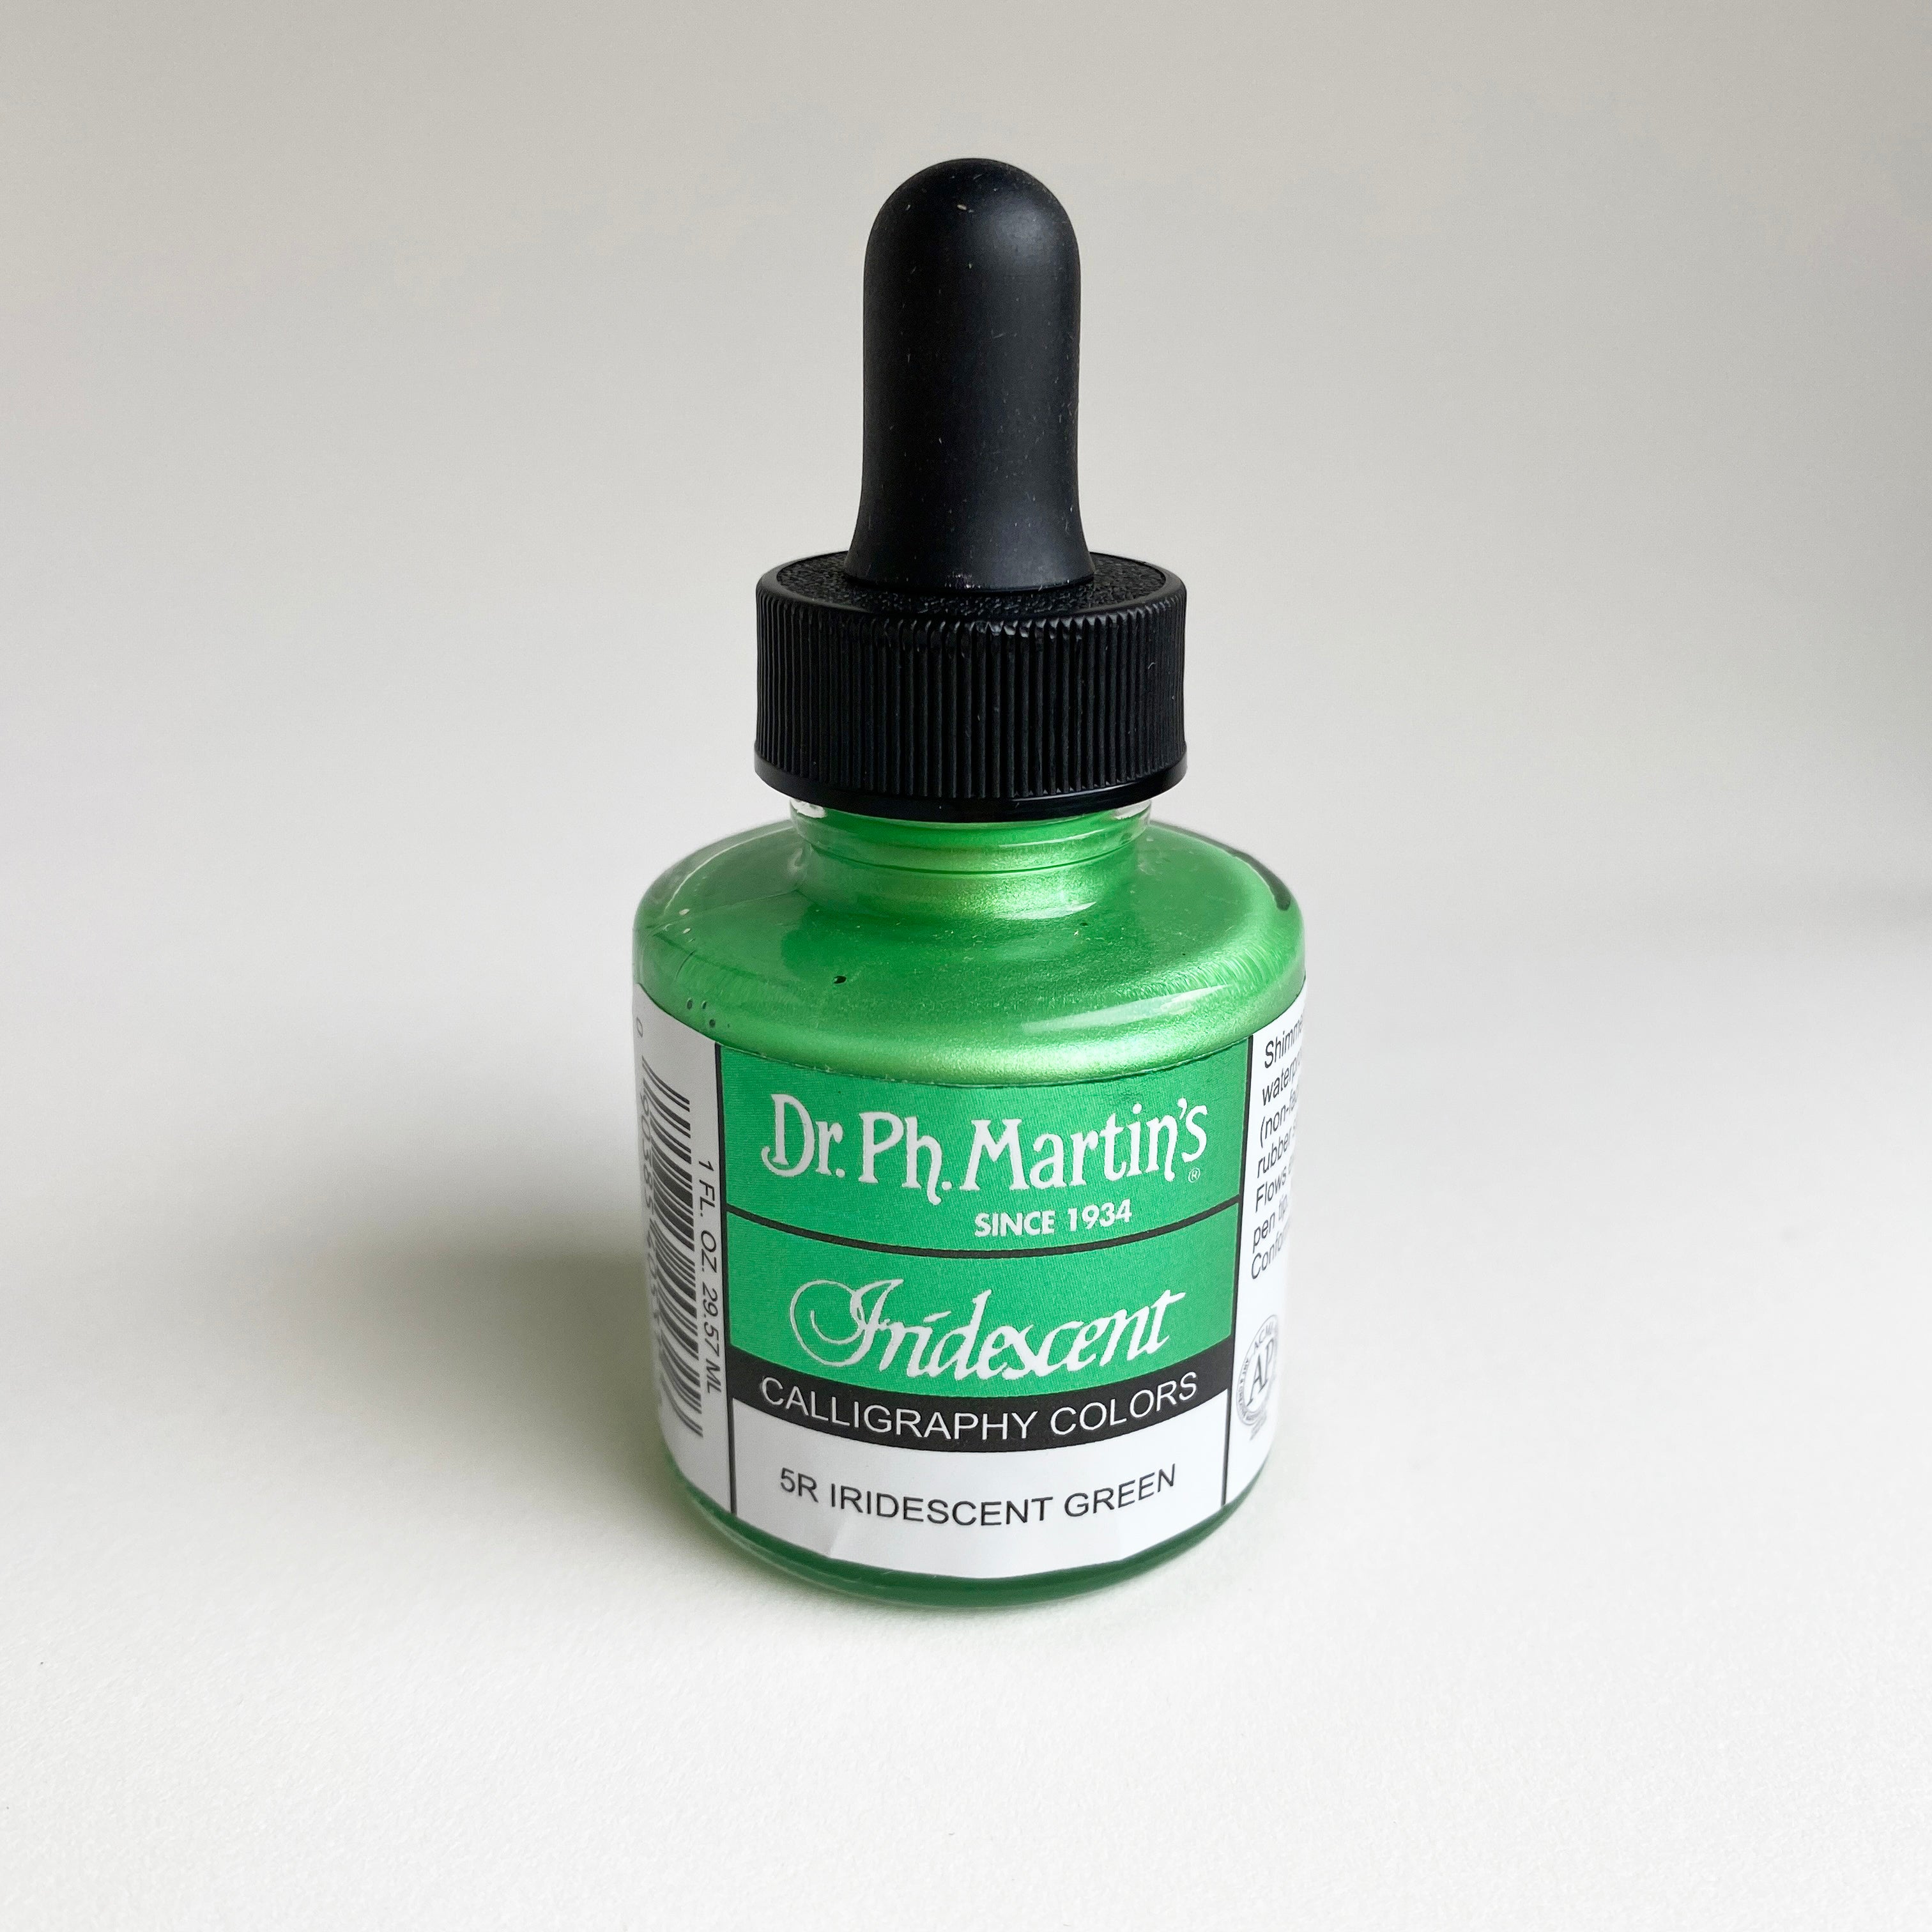 Dr Ph Martin's Iridescent Calligraphy Ink – Meticulous Ink39sDrPhMartin その他